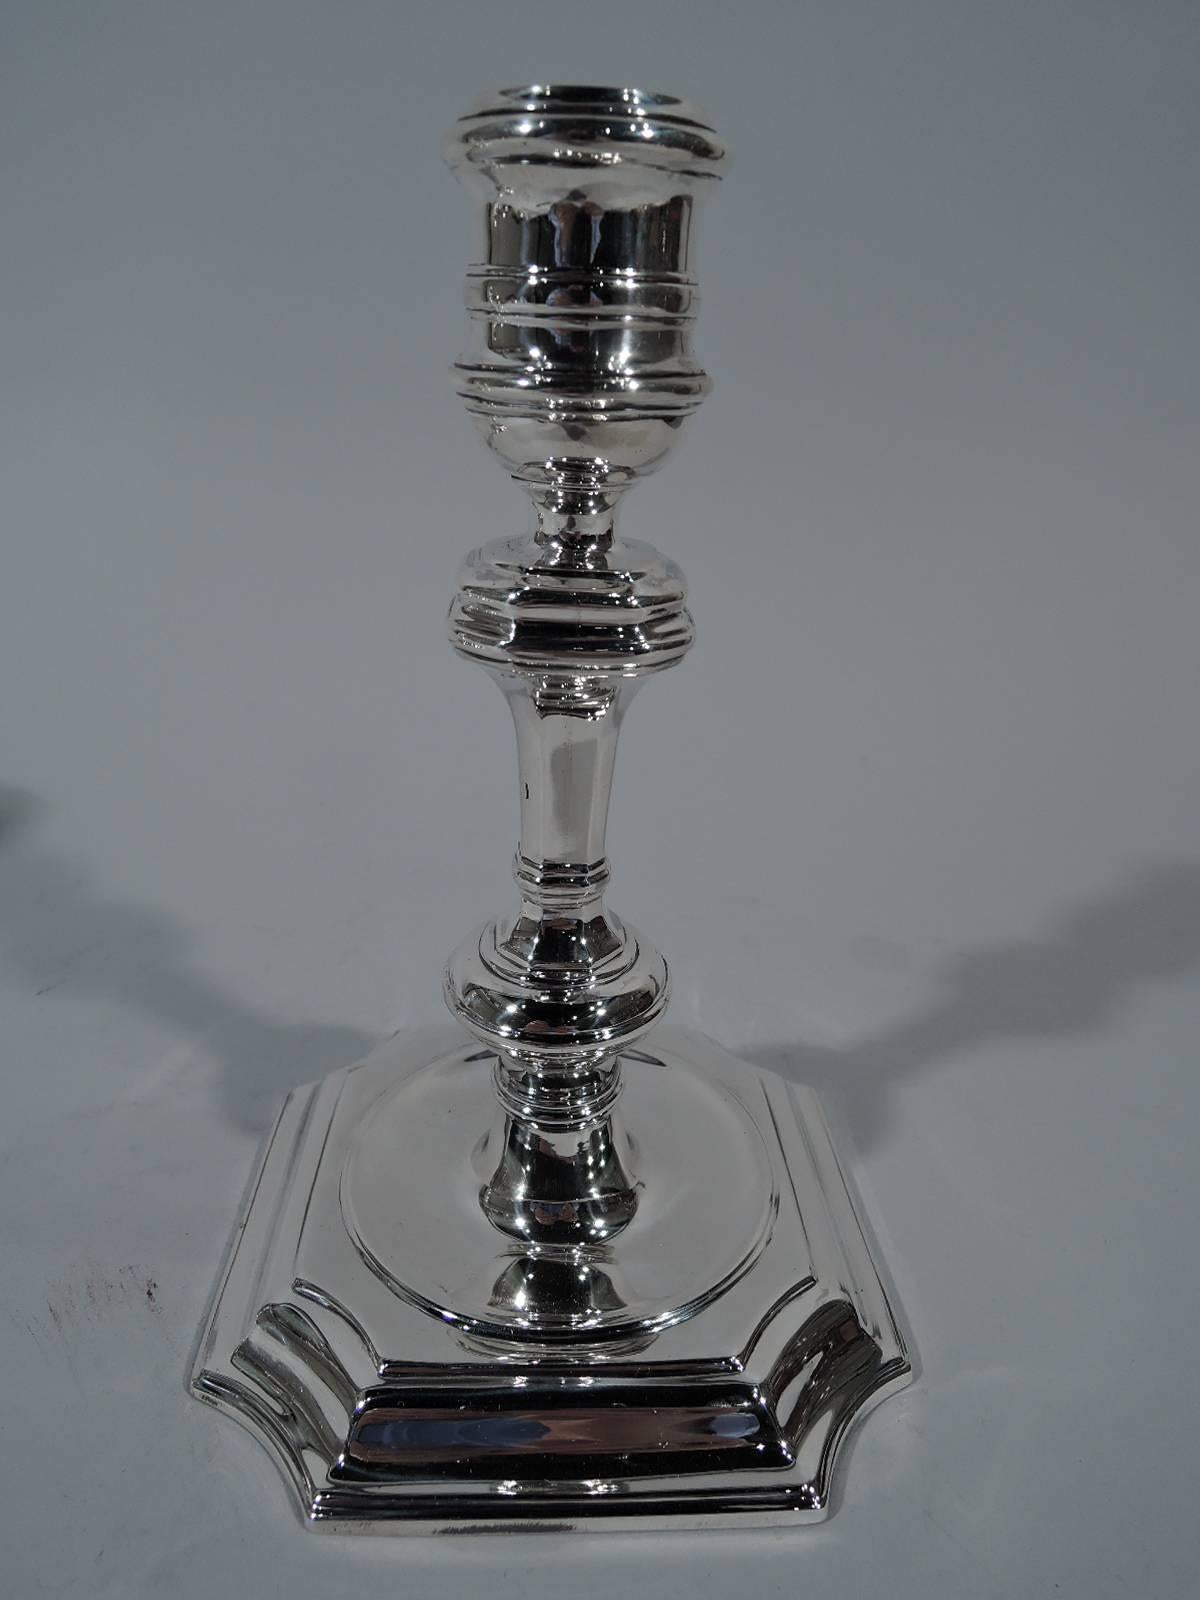 Pair of Georgian-style sterling silver candlesticks. Made by Tiffany & Co. in New York, circa 1915. Each: Spool socket, faceted and knopped shaft, and stepped square base with concave corners. Representative English style based on a design by